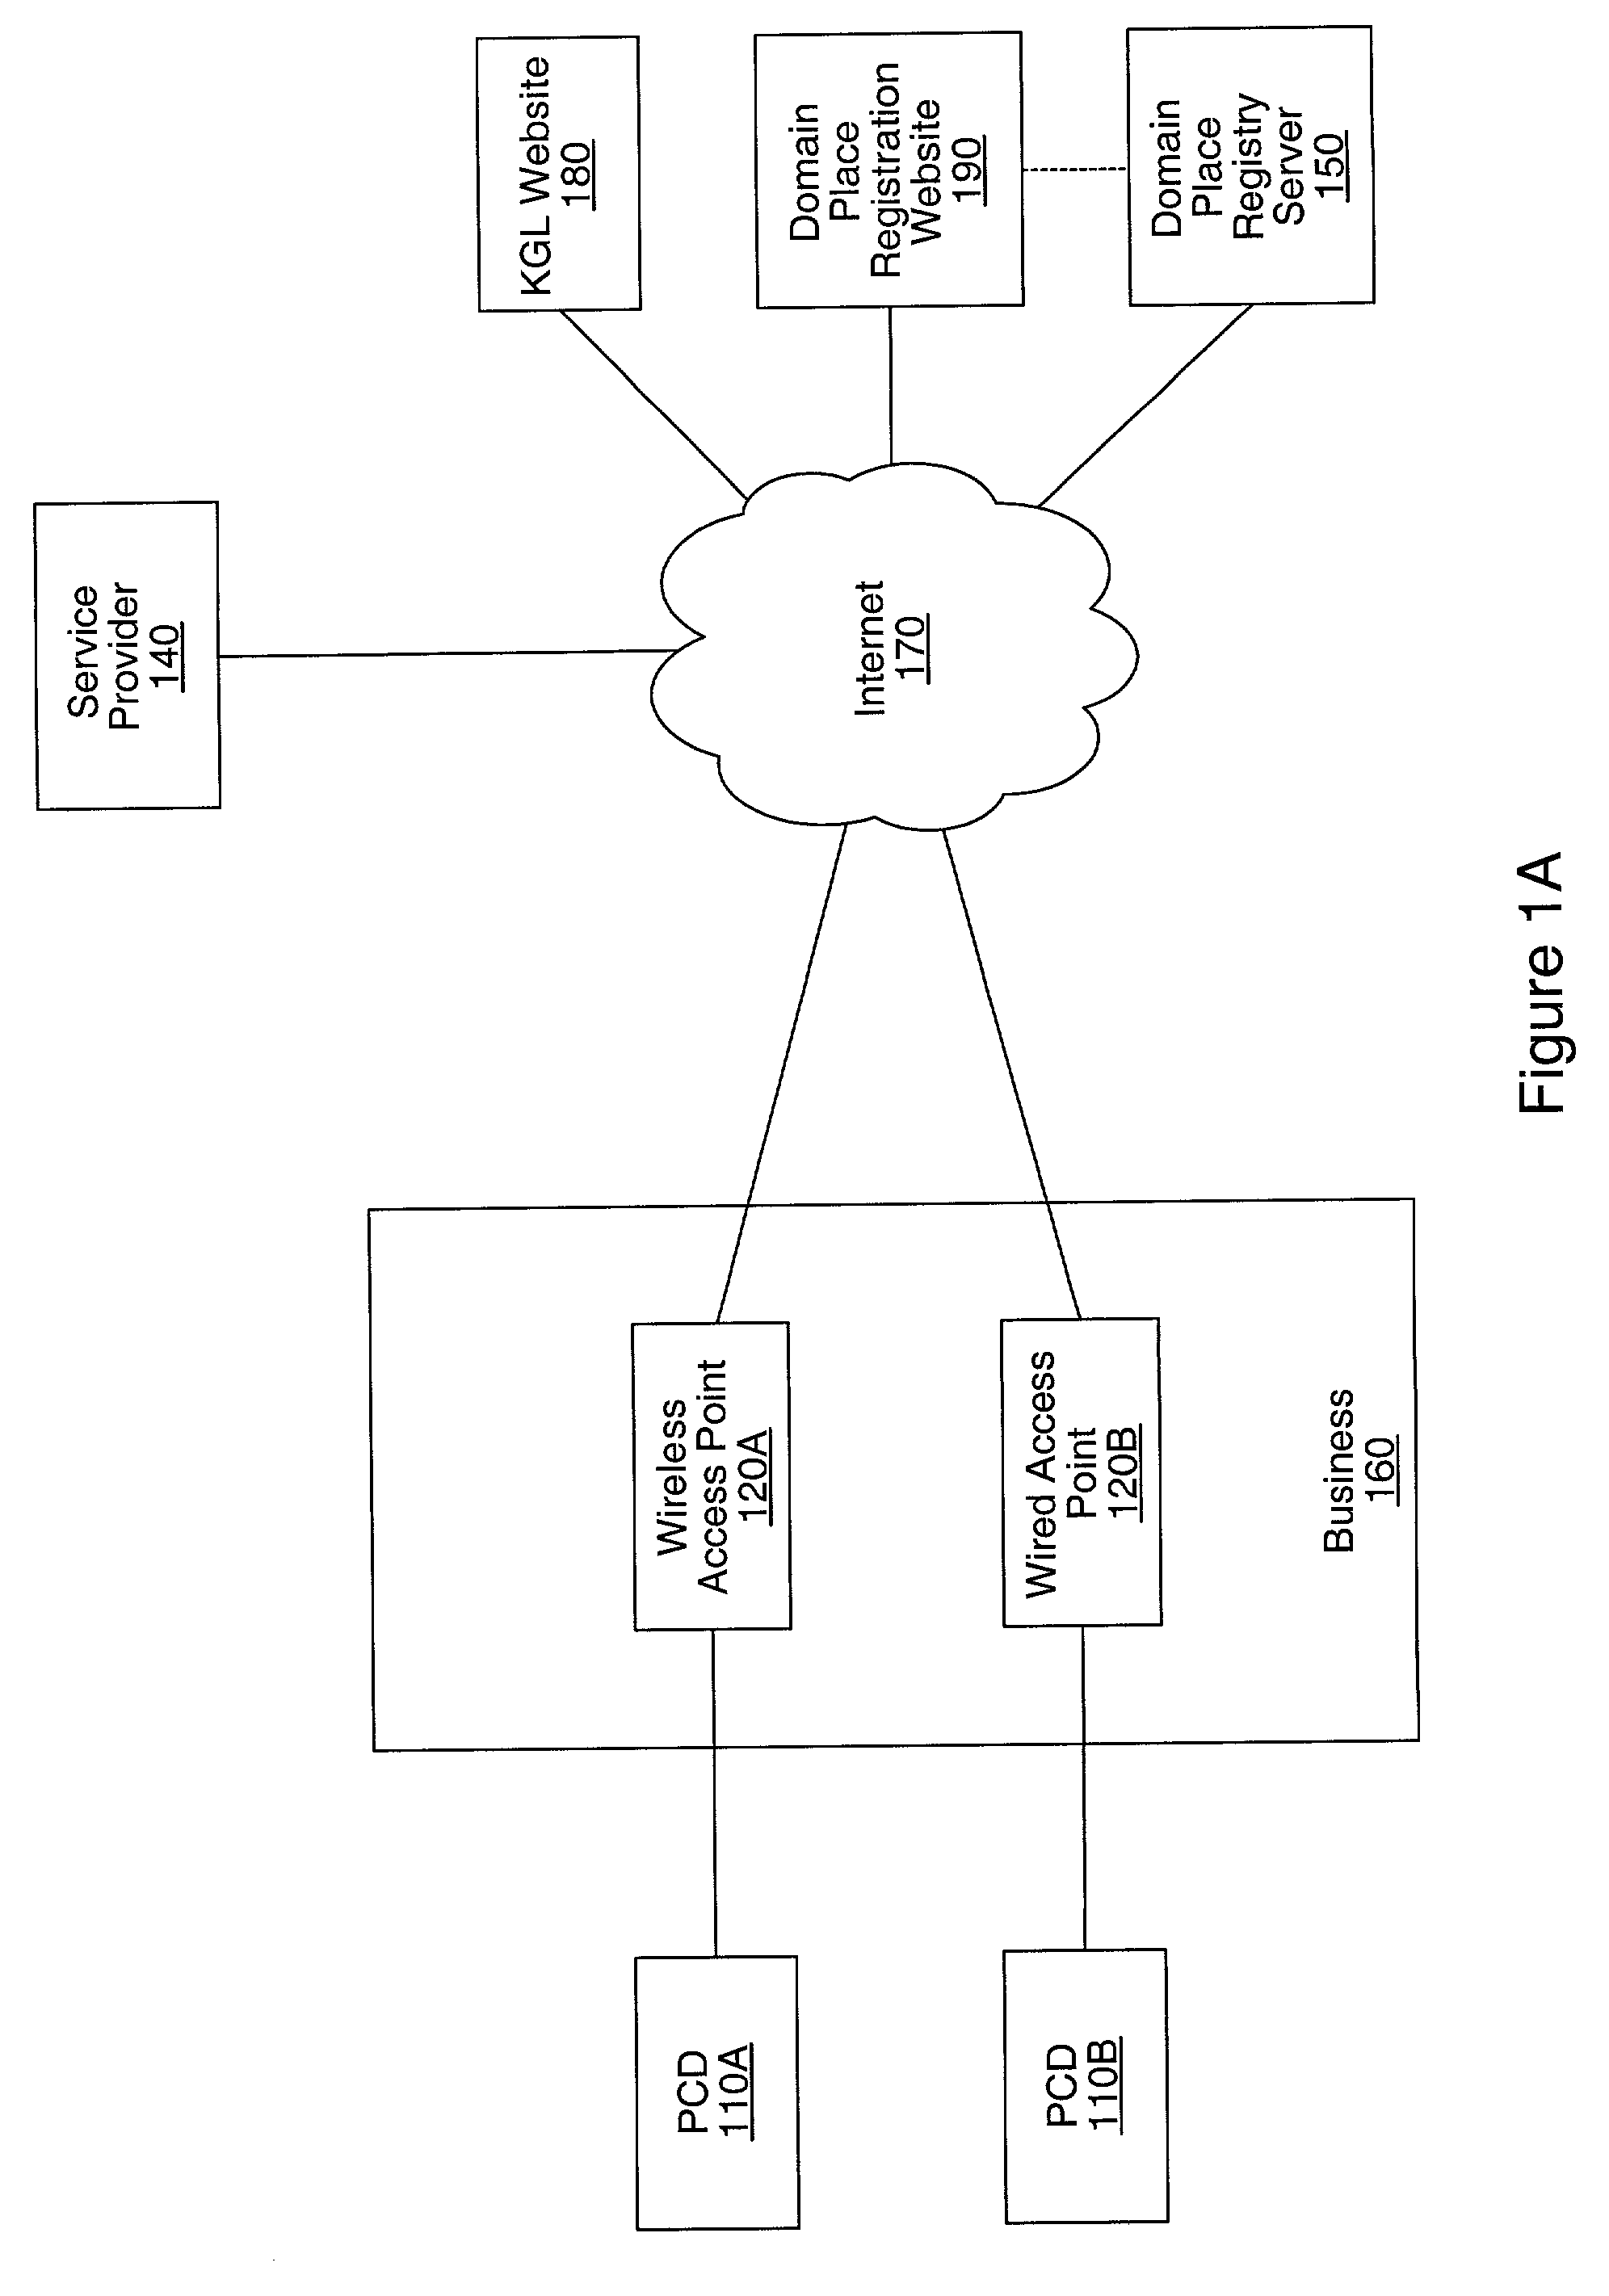 Domain place registration system and method for registering for geographic based services